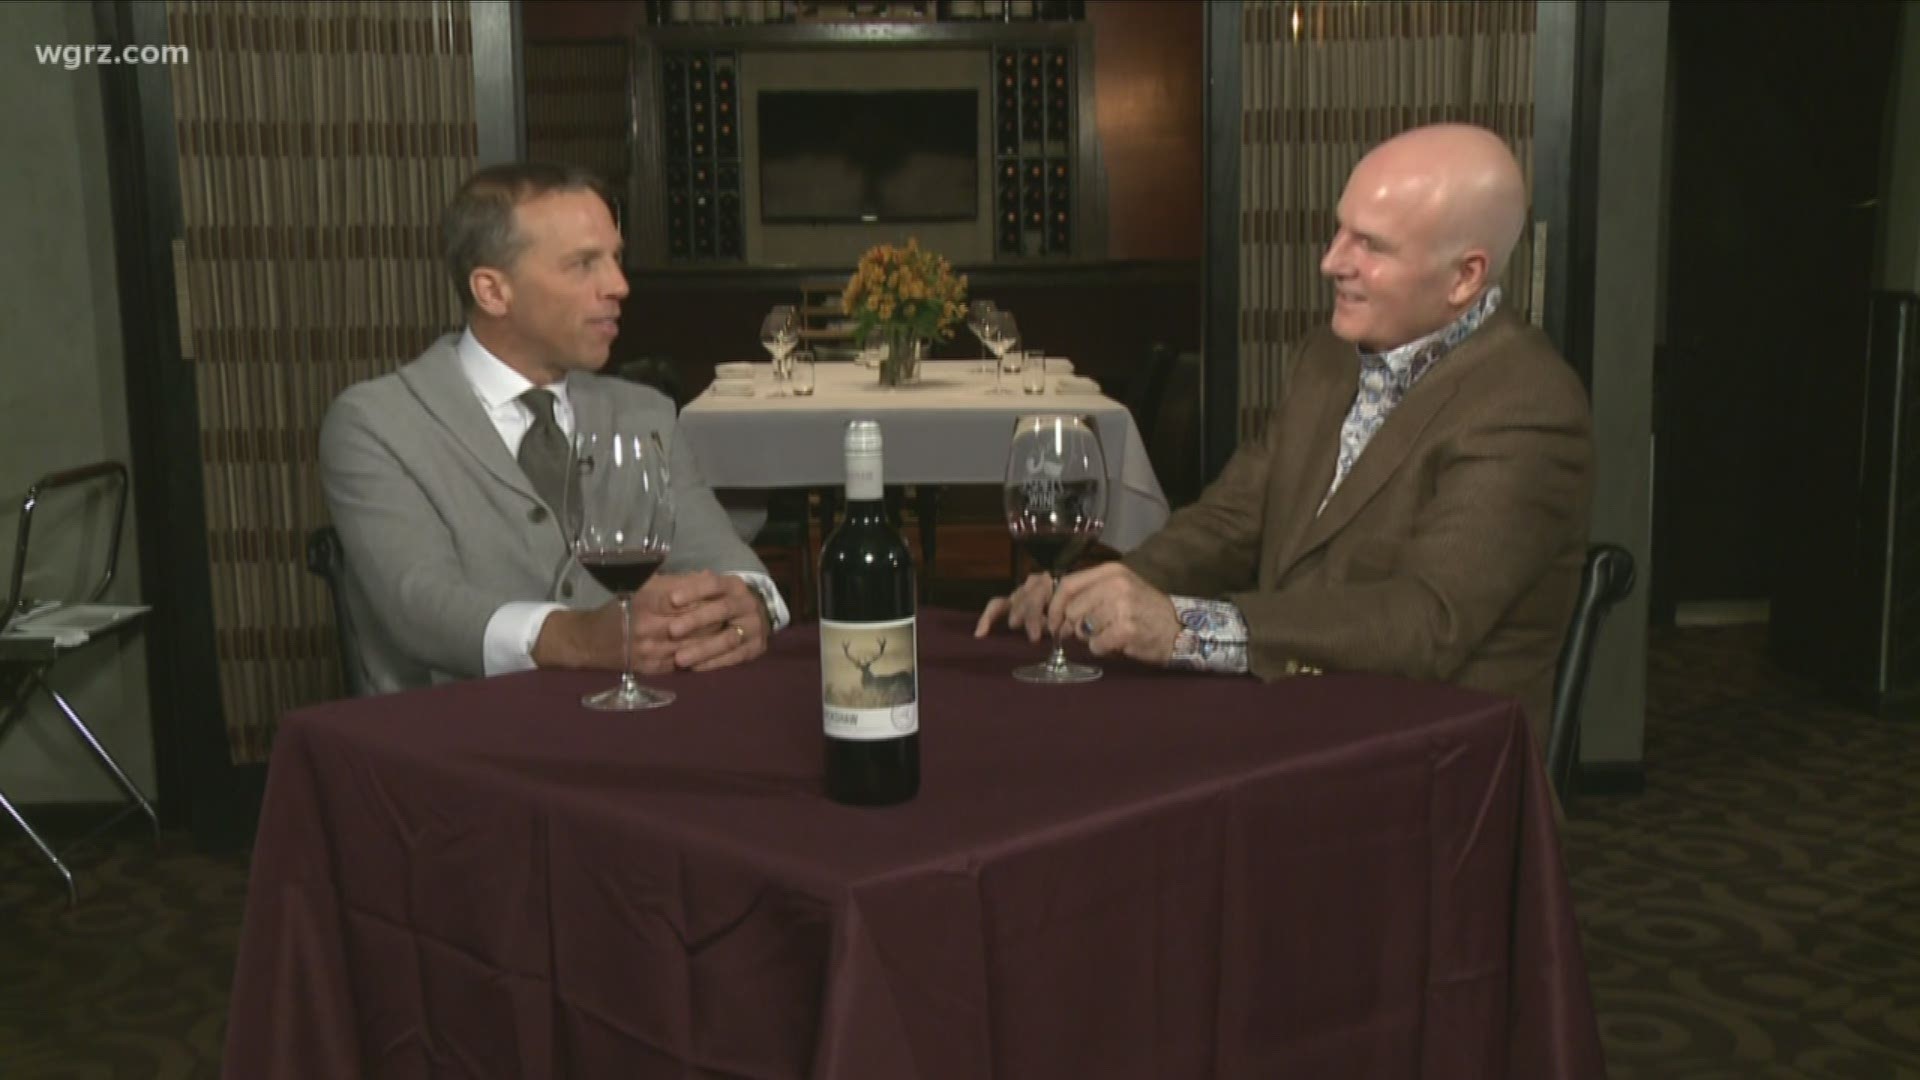 Spiel The Wine - November 30 - Segment 4 (THIS VIDEO IS SPONSORED BY THE GLOBAL GROUP)